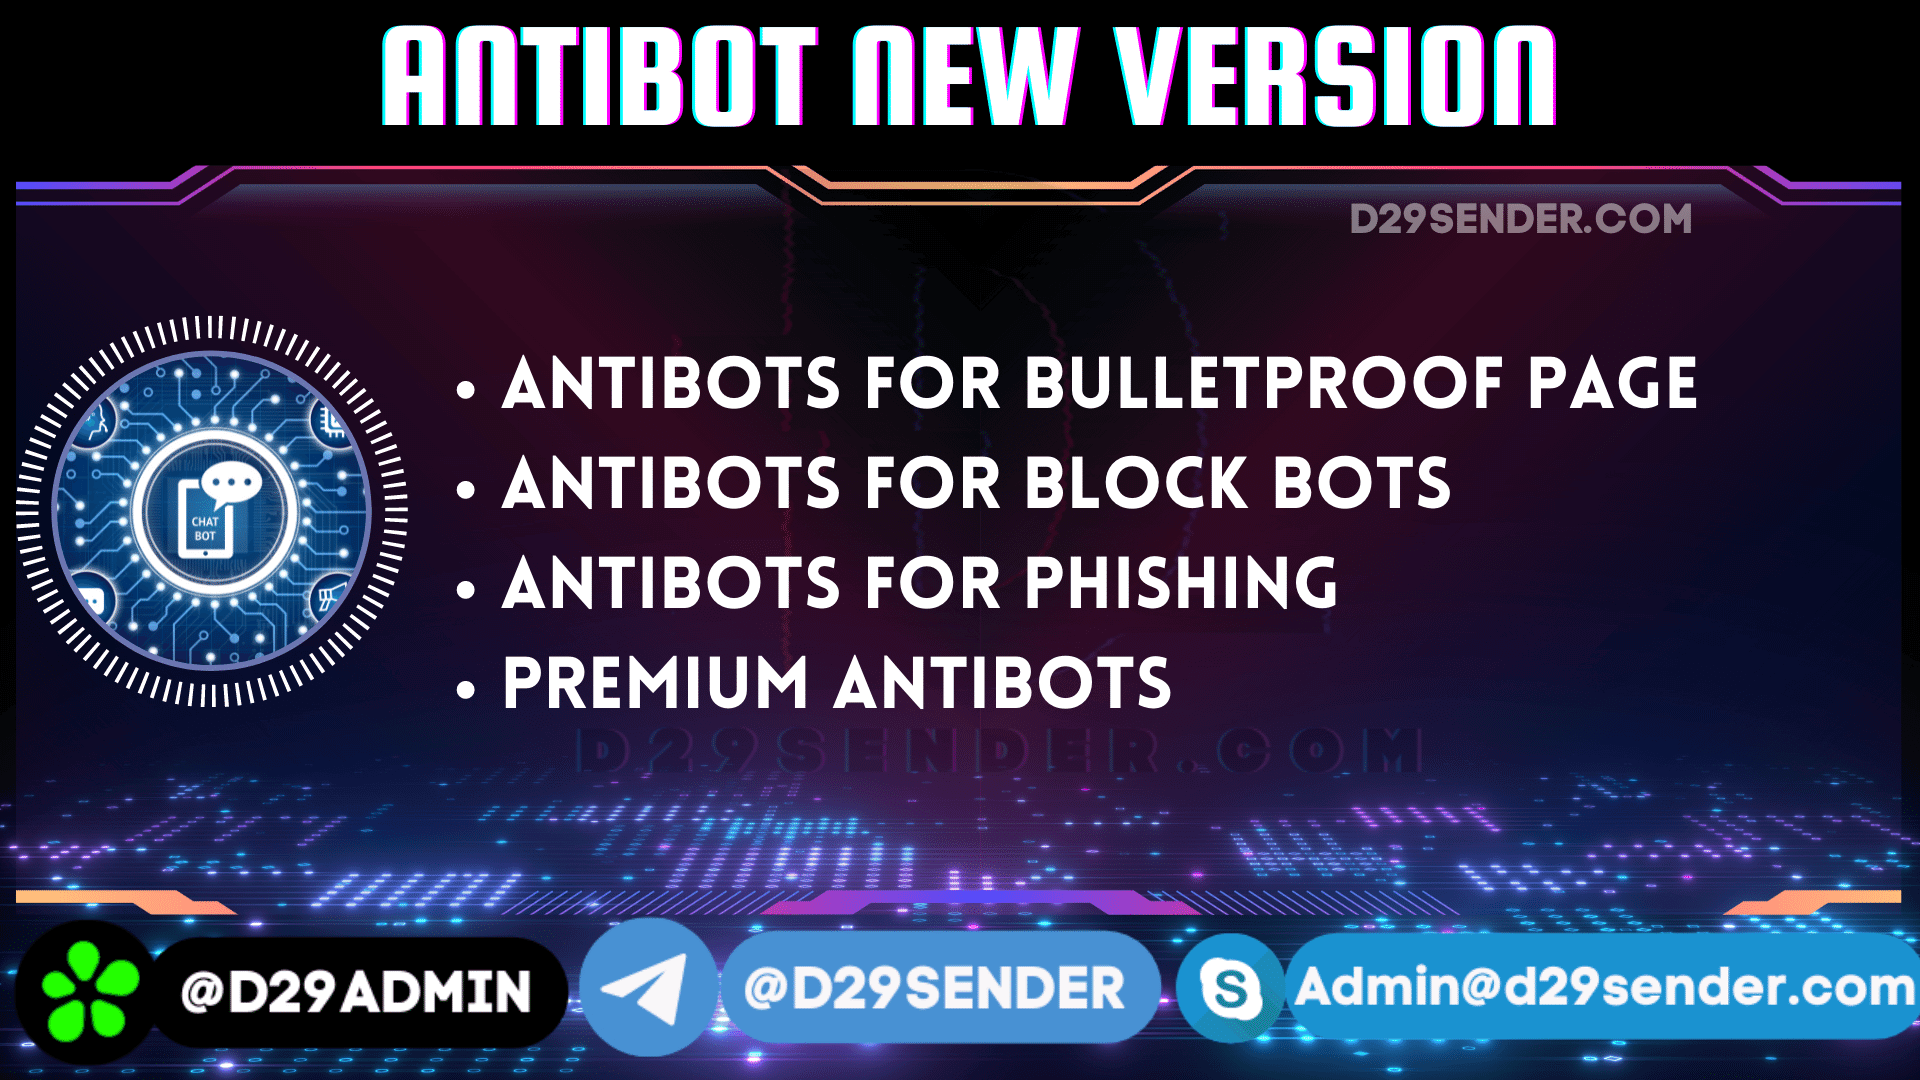 Antibot Software for fud pages – Updated